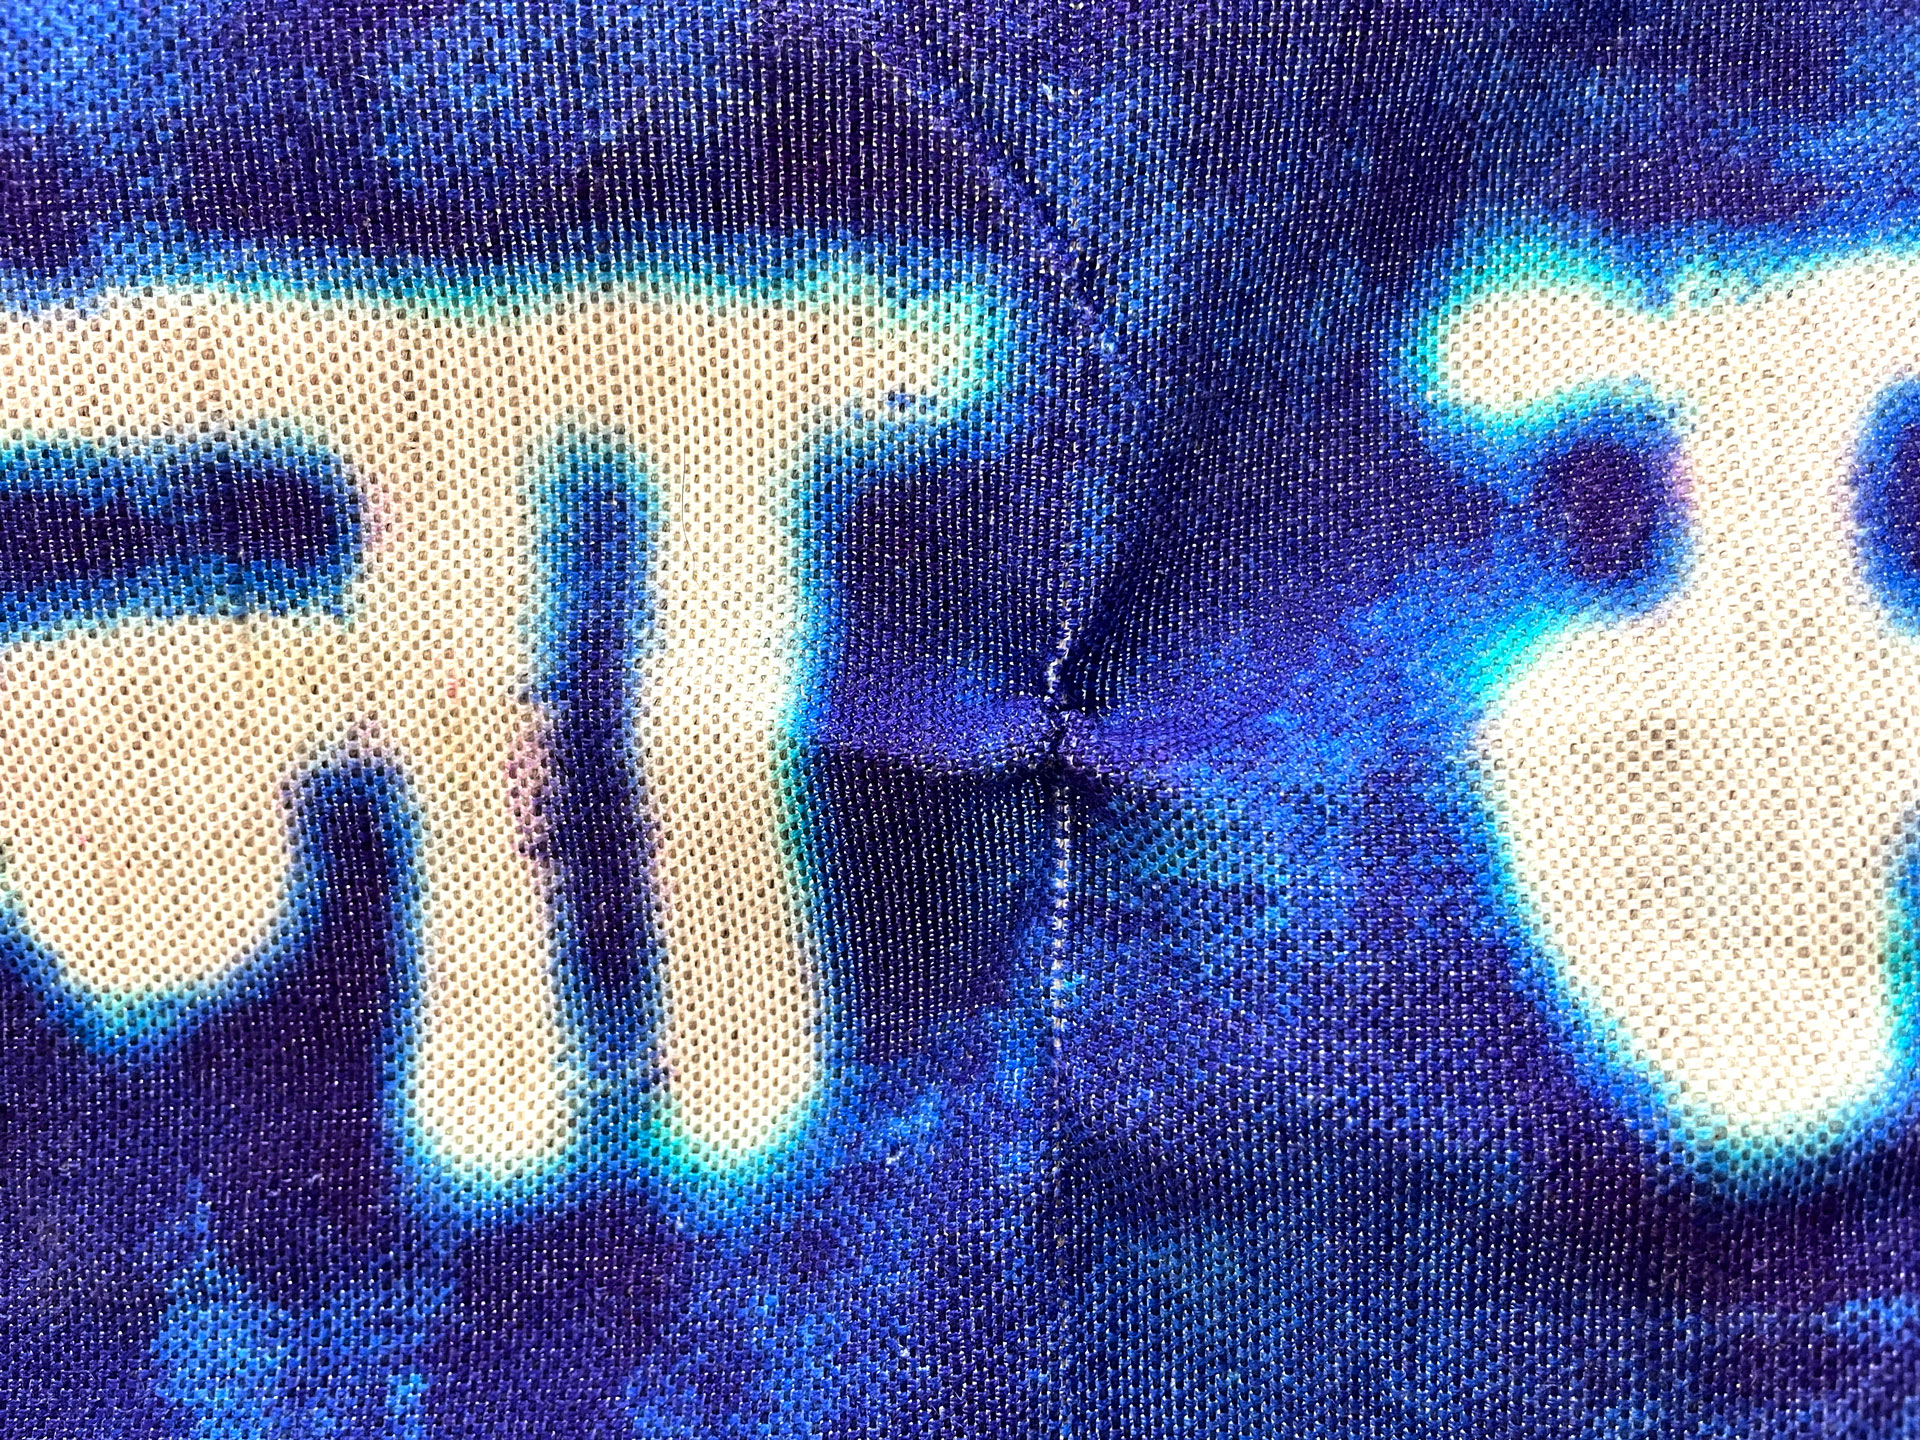 Detail of the blue and white sign on fabric.